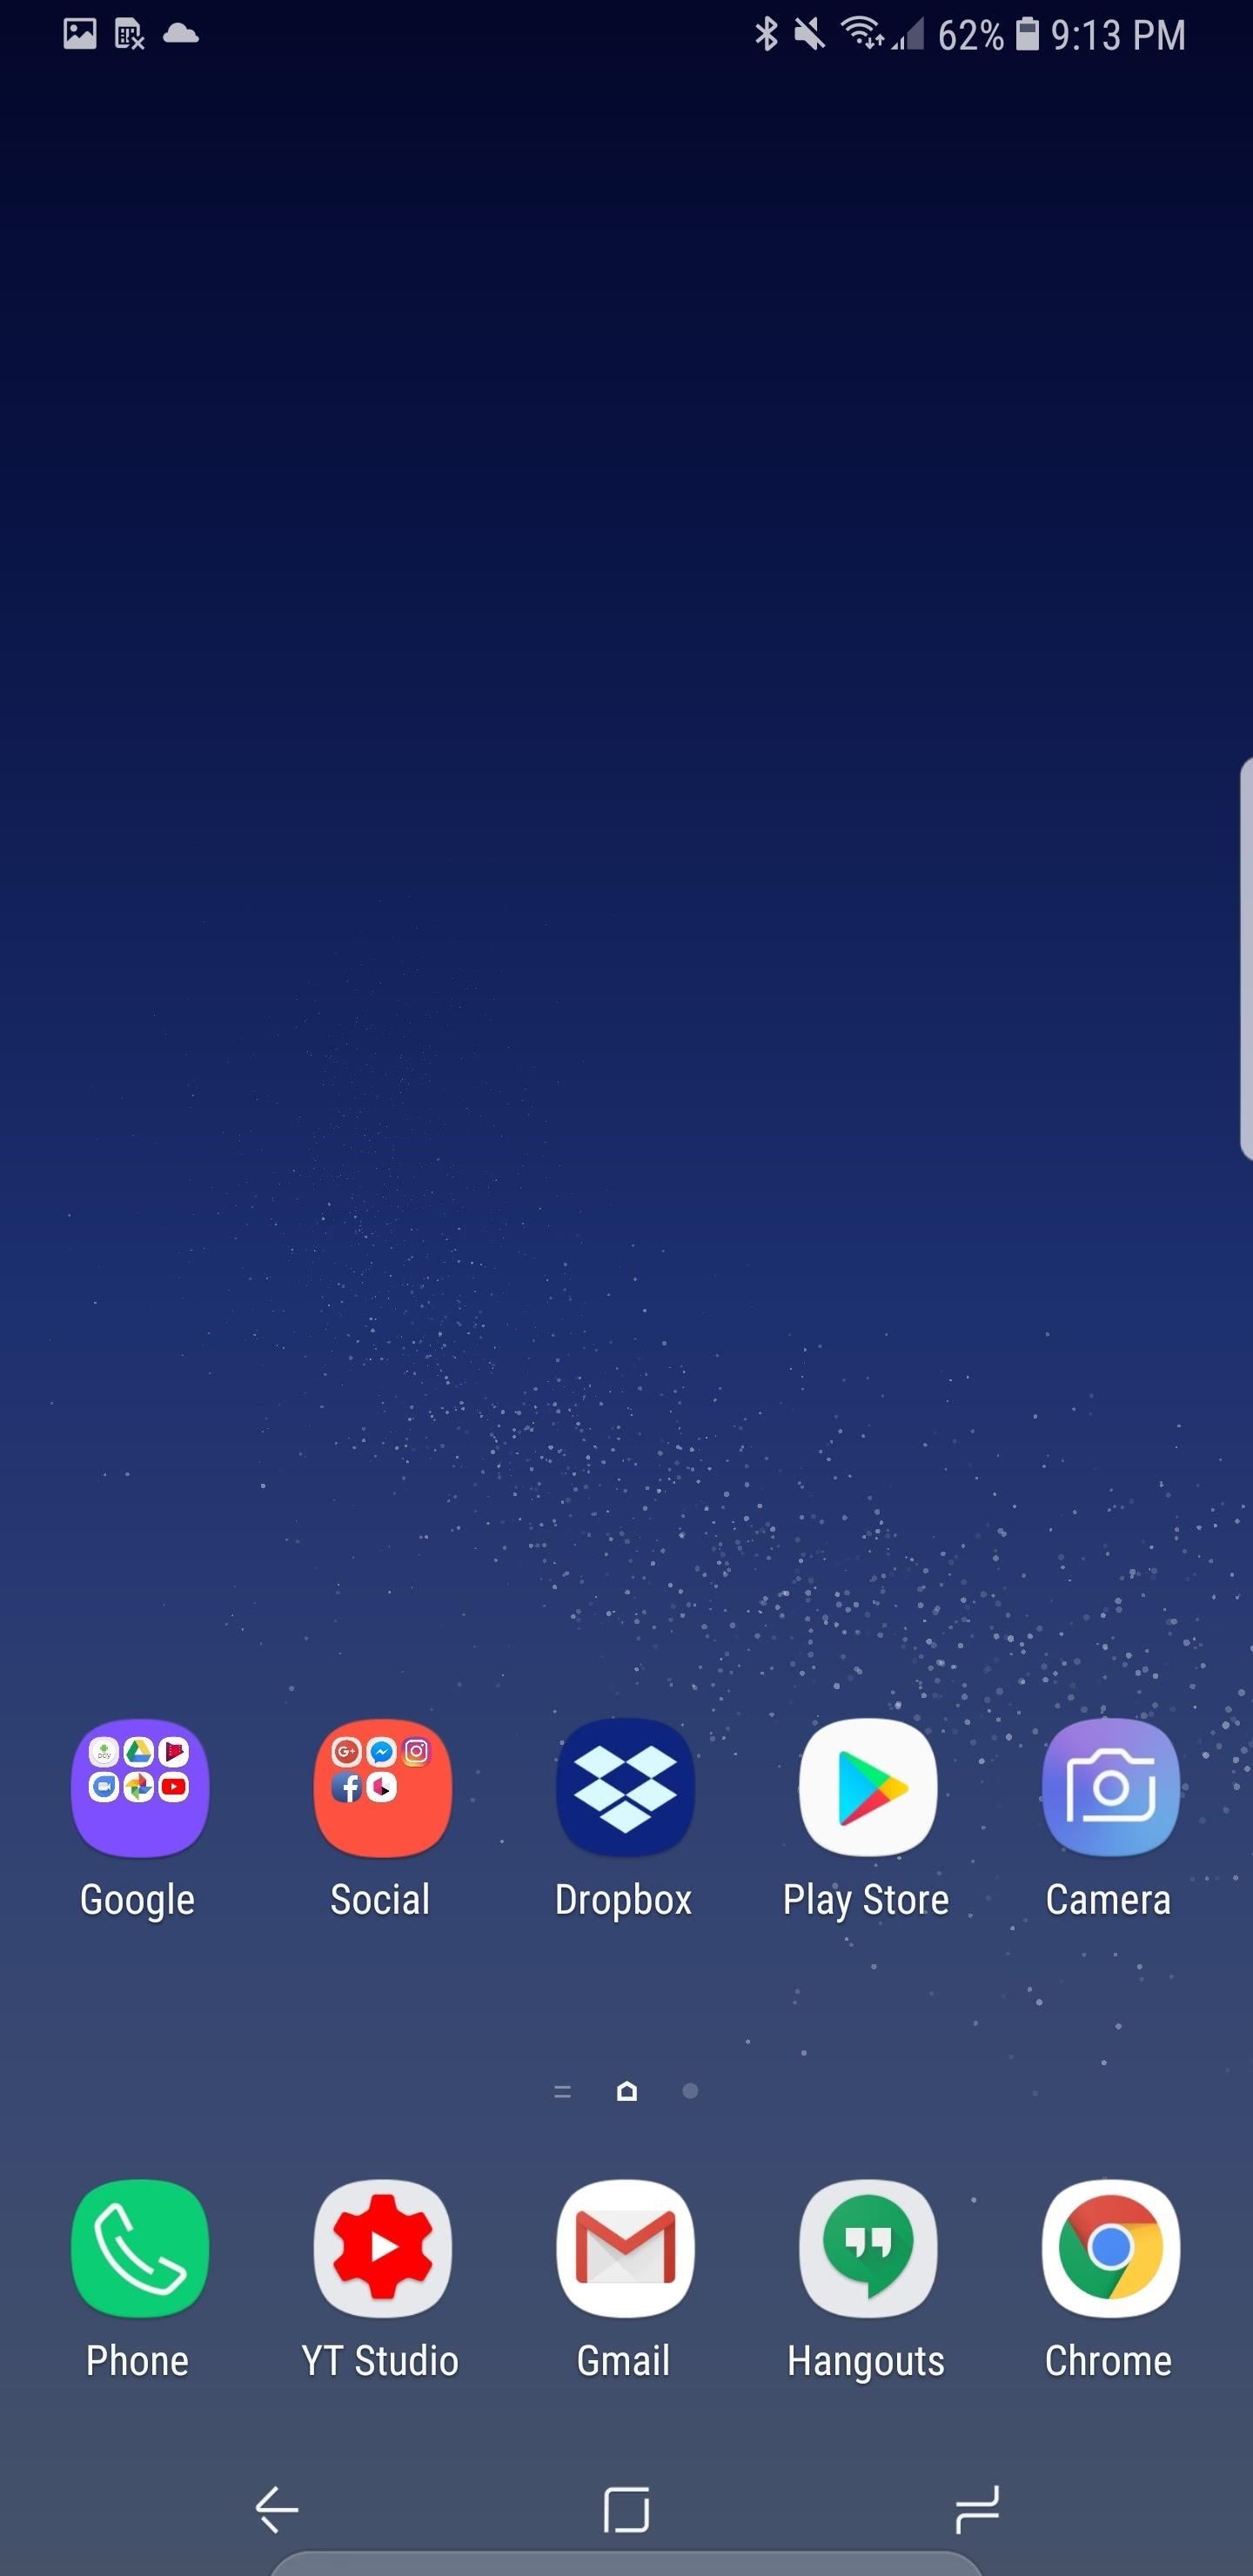 Galaxy S8 Oreo Update: New Home Screen Features Coming in Android 8.0